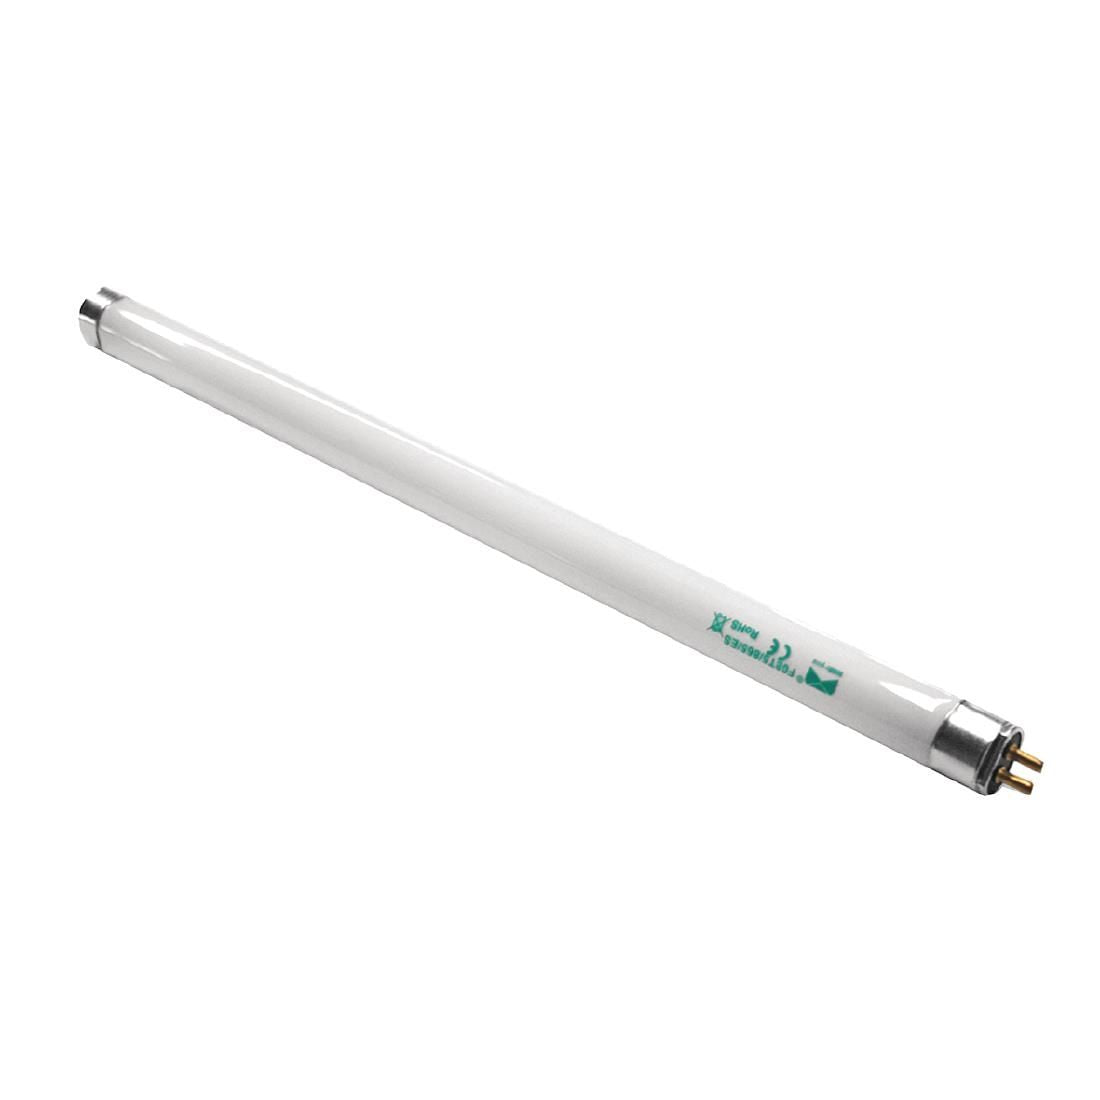 AD324 Replacement Fluorescent Tube (BY2161B-14W) for CB930 CB931 CB932 CC601 CC605 CE206 CE207 CF759